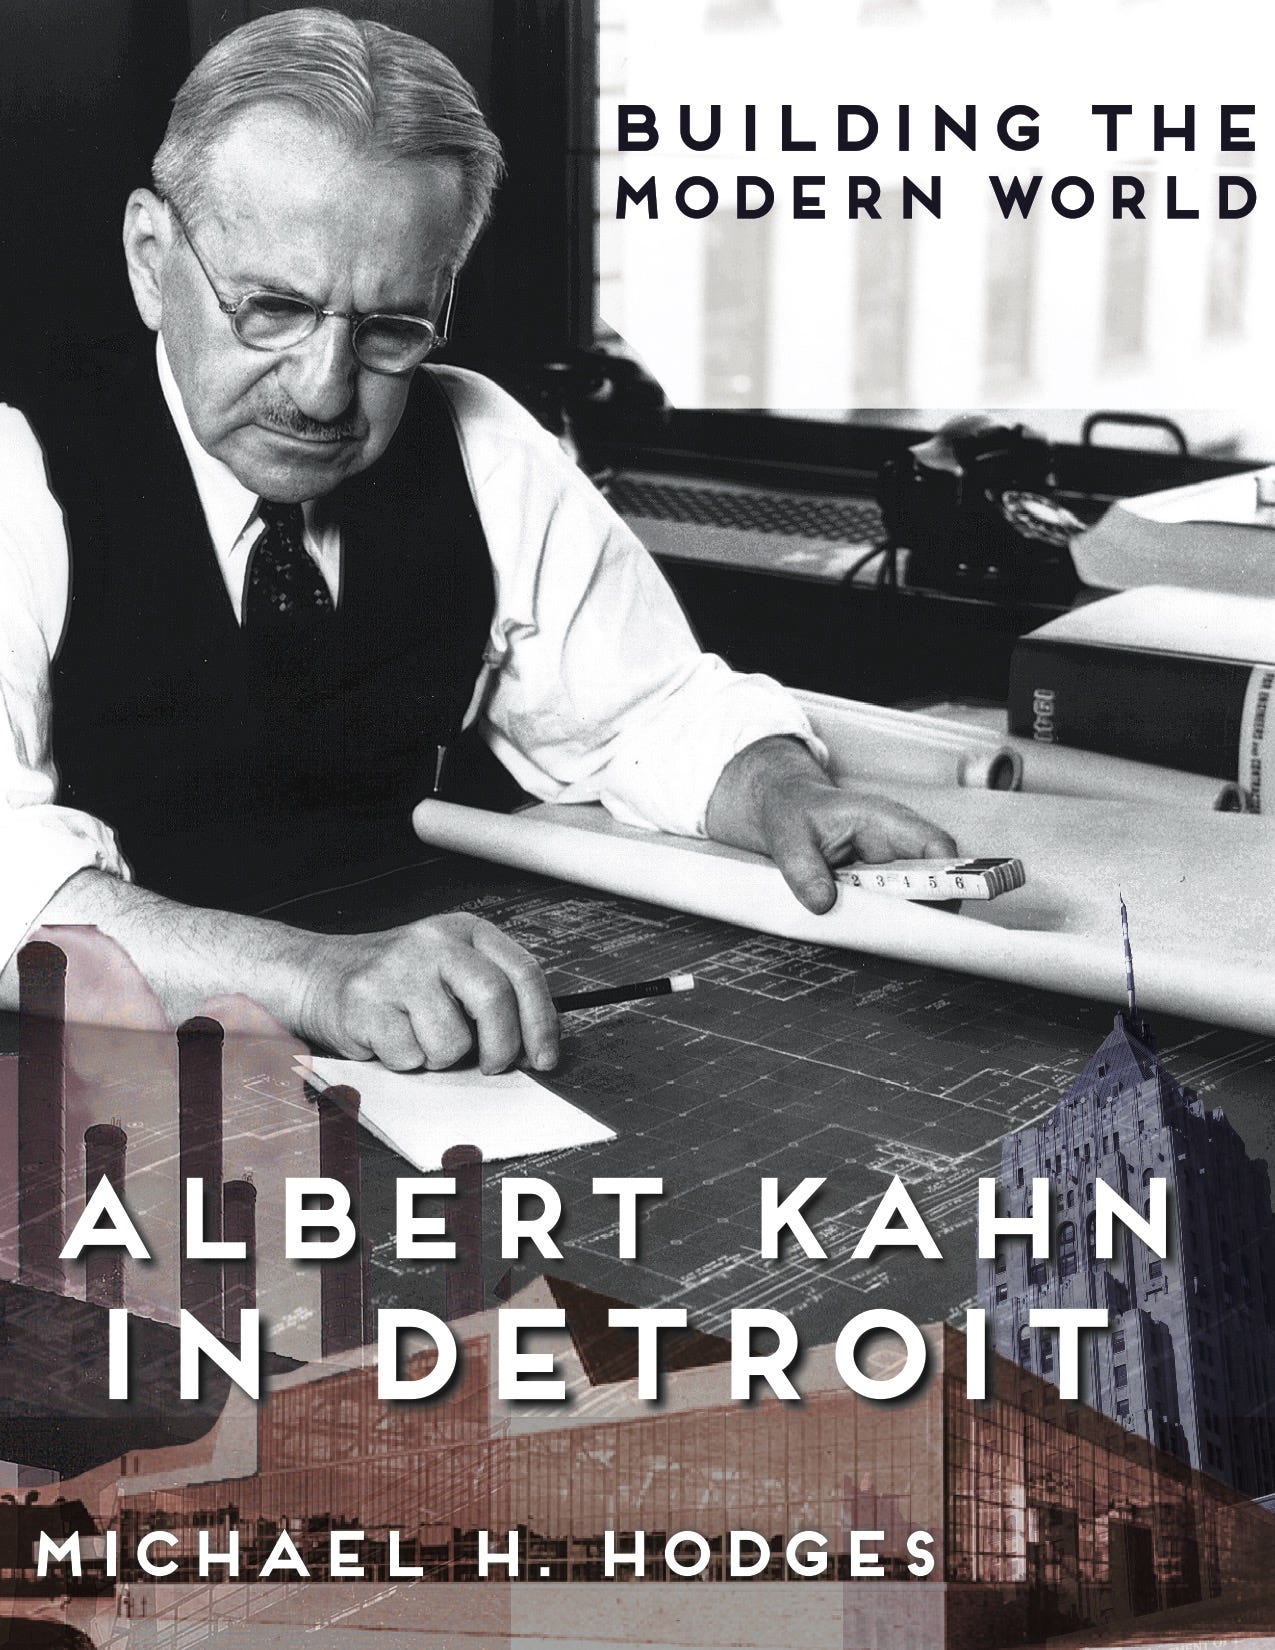 "Building the Modern World: Albert Kahn in Detroit" by Michael H. Hodges won First Place for Biography in the Midwest Book Awards.